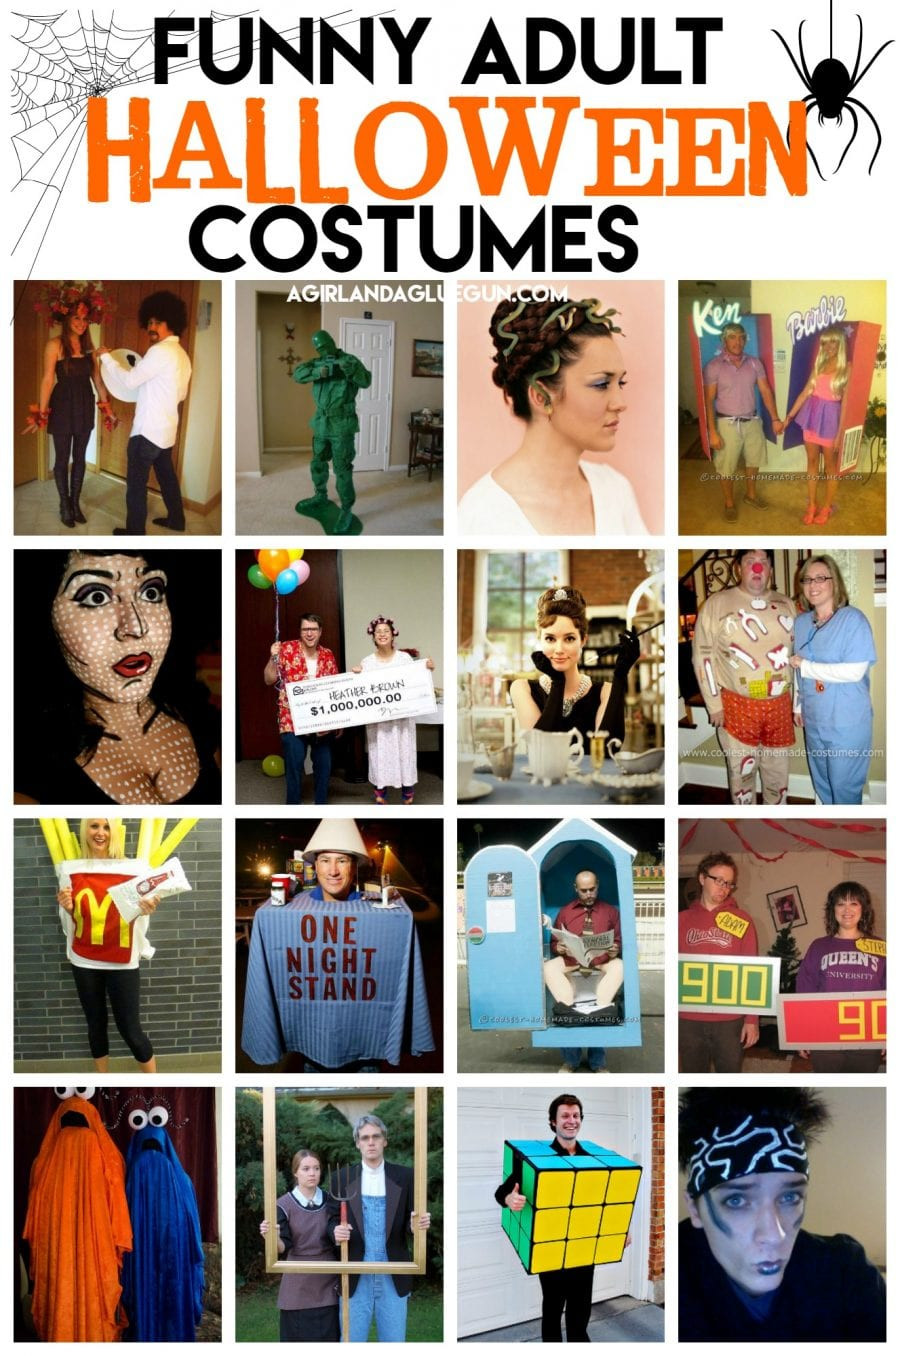 DIY Adult Halloween Costumes
 Funny Halloween Costumes for Adults that you can DIY A